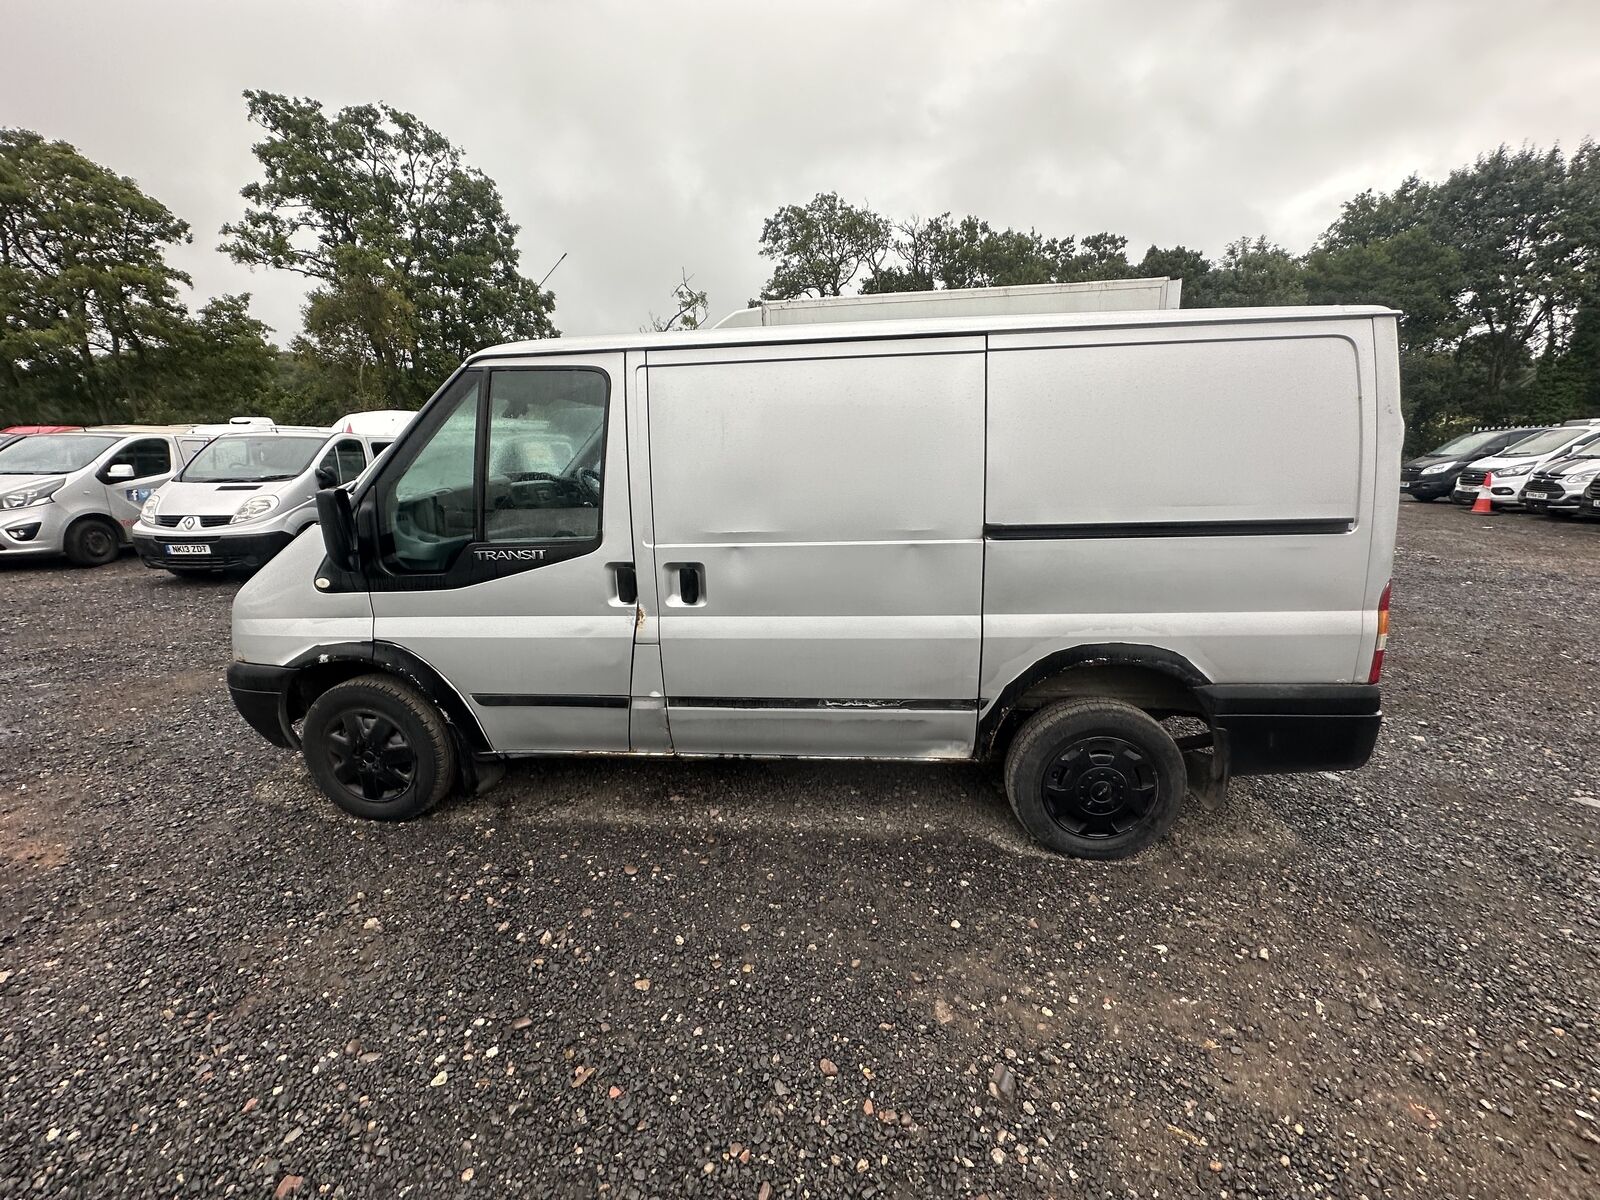 Bid on 2008 FORD TRANSIT 260 SWB DIESEL: THE ULTIMATE WORK COMPANION (NO VAT ON HAMMER)- Buy &amp; Sell on Auction with EAMA Group